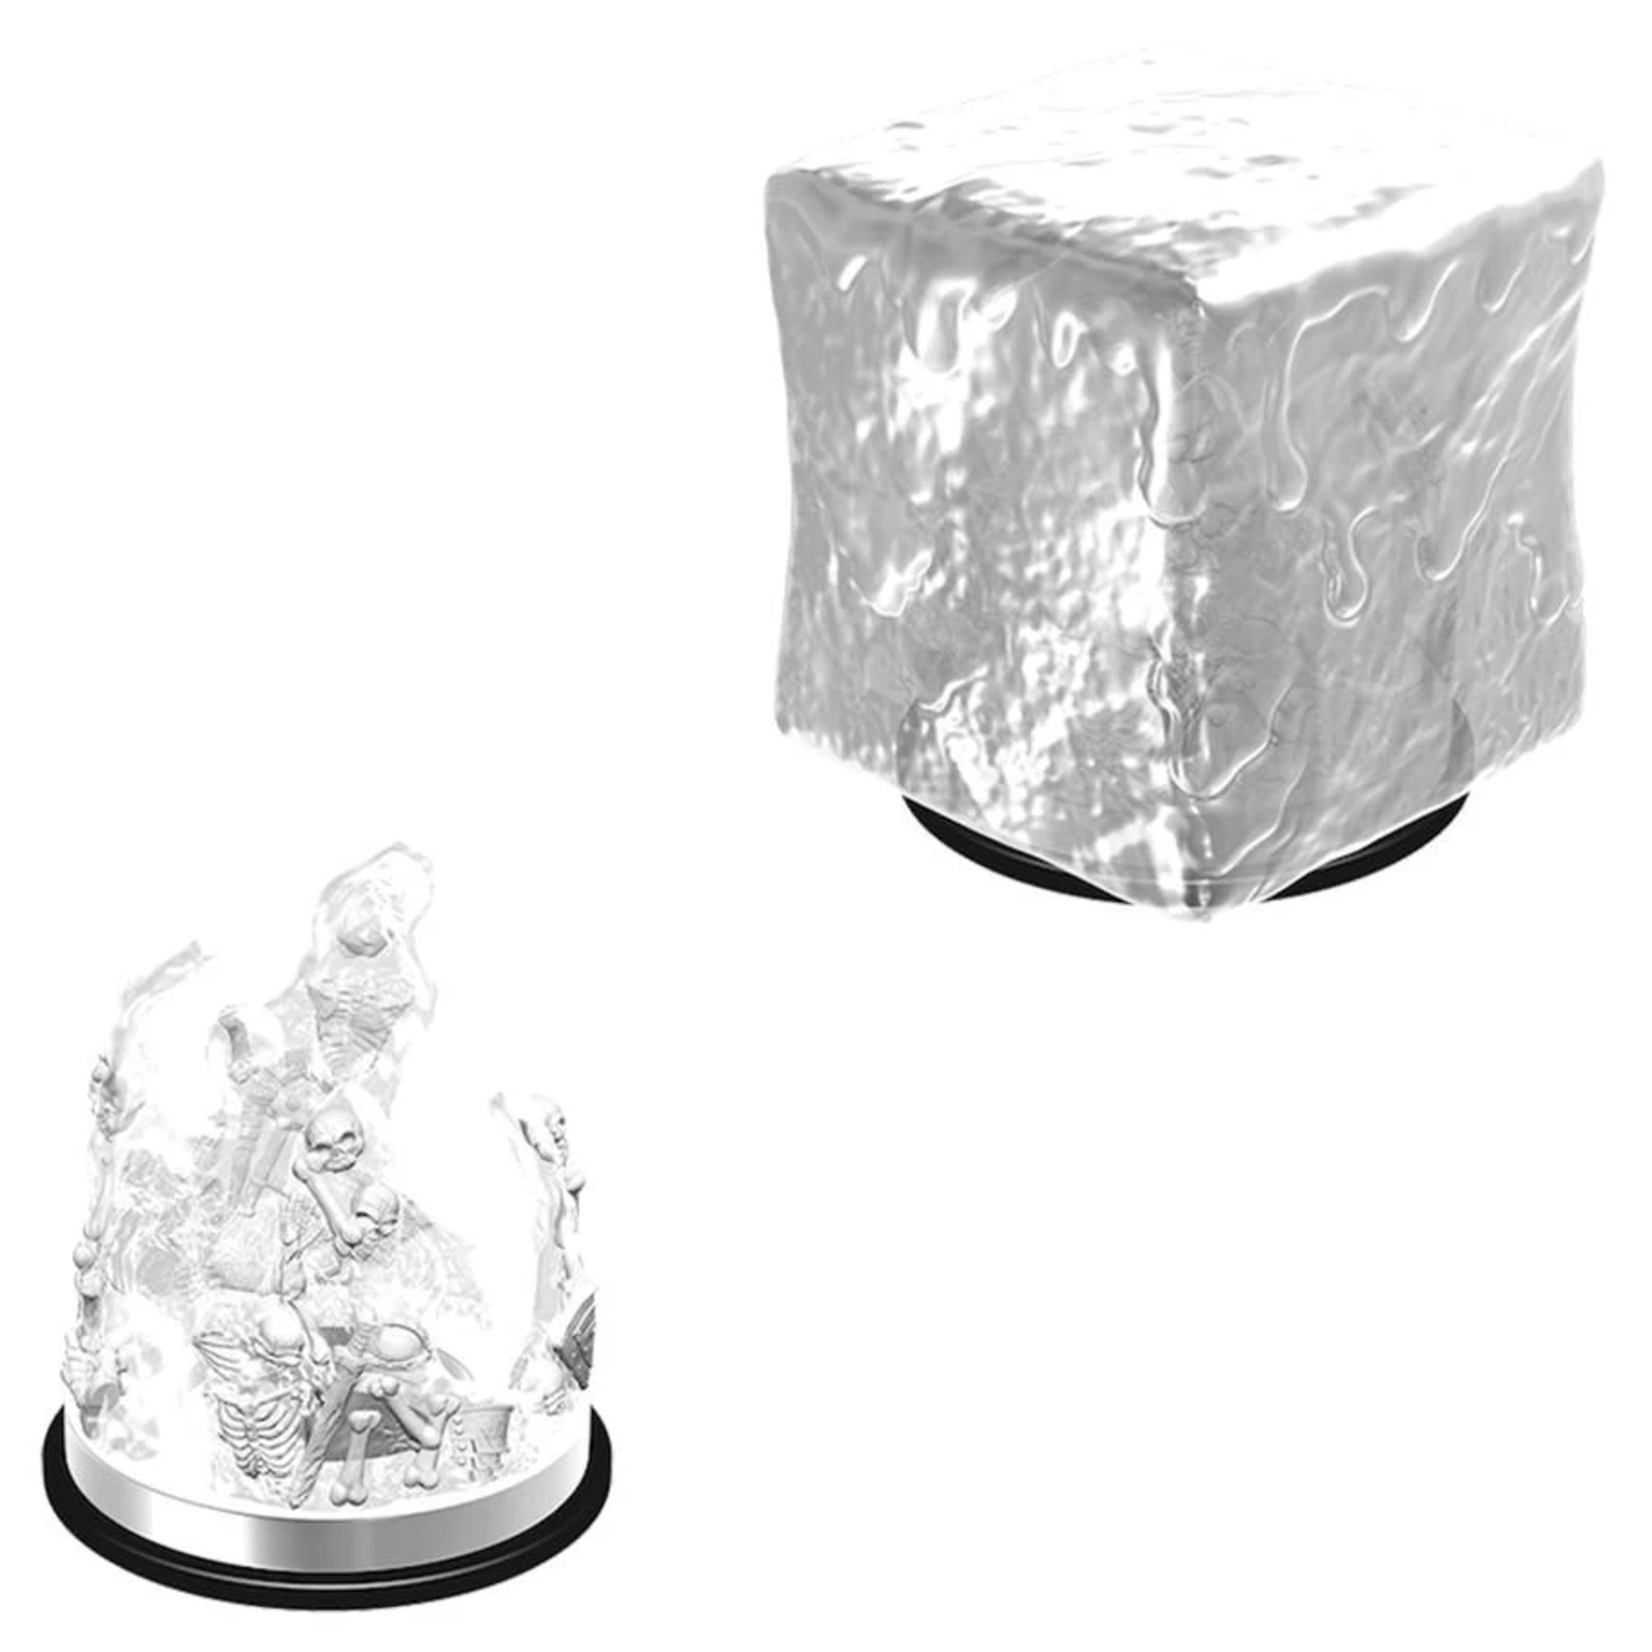 WizKids Dungeons and Dragons Nolzur's Marvelous Minis Gelatinous Cube